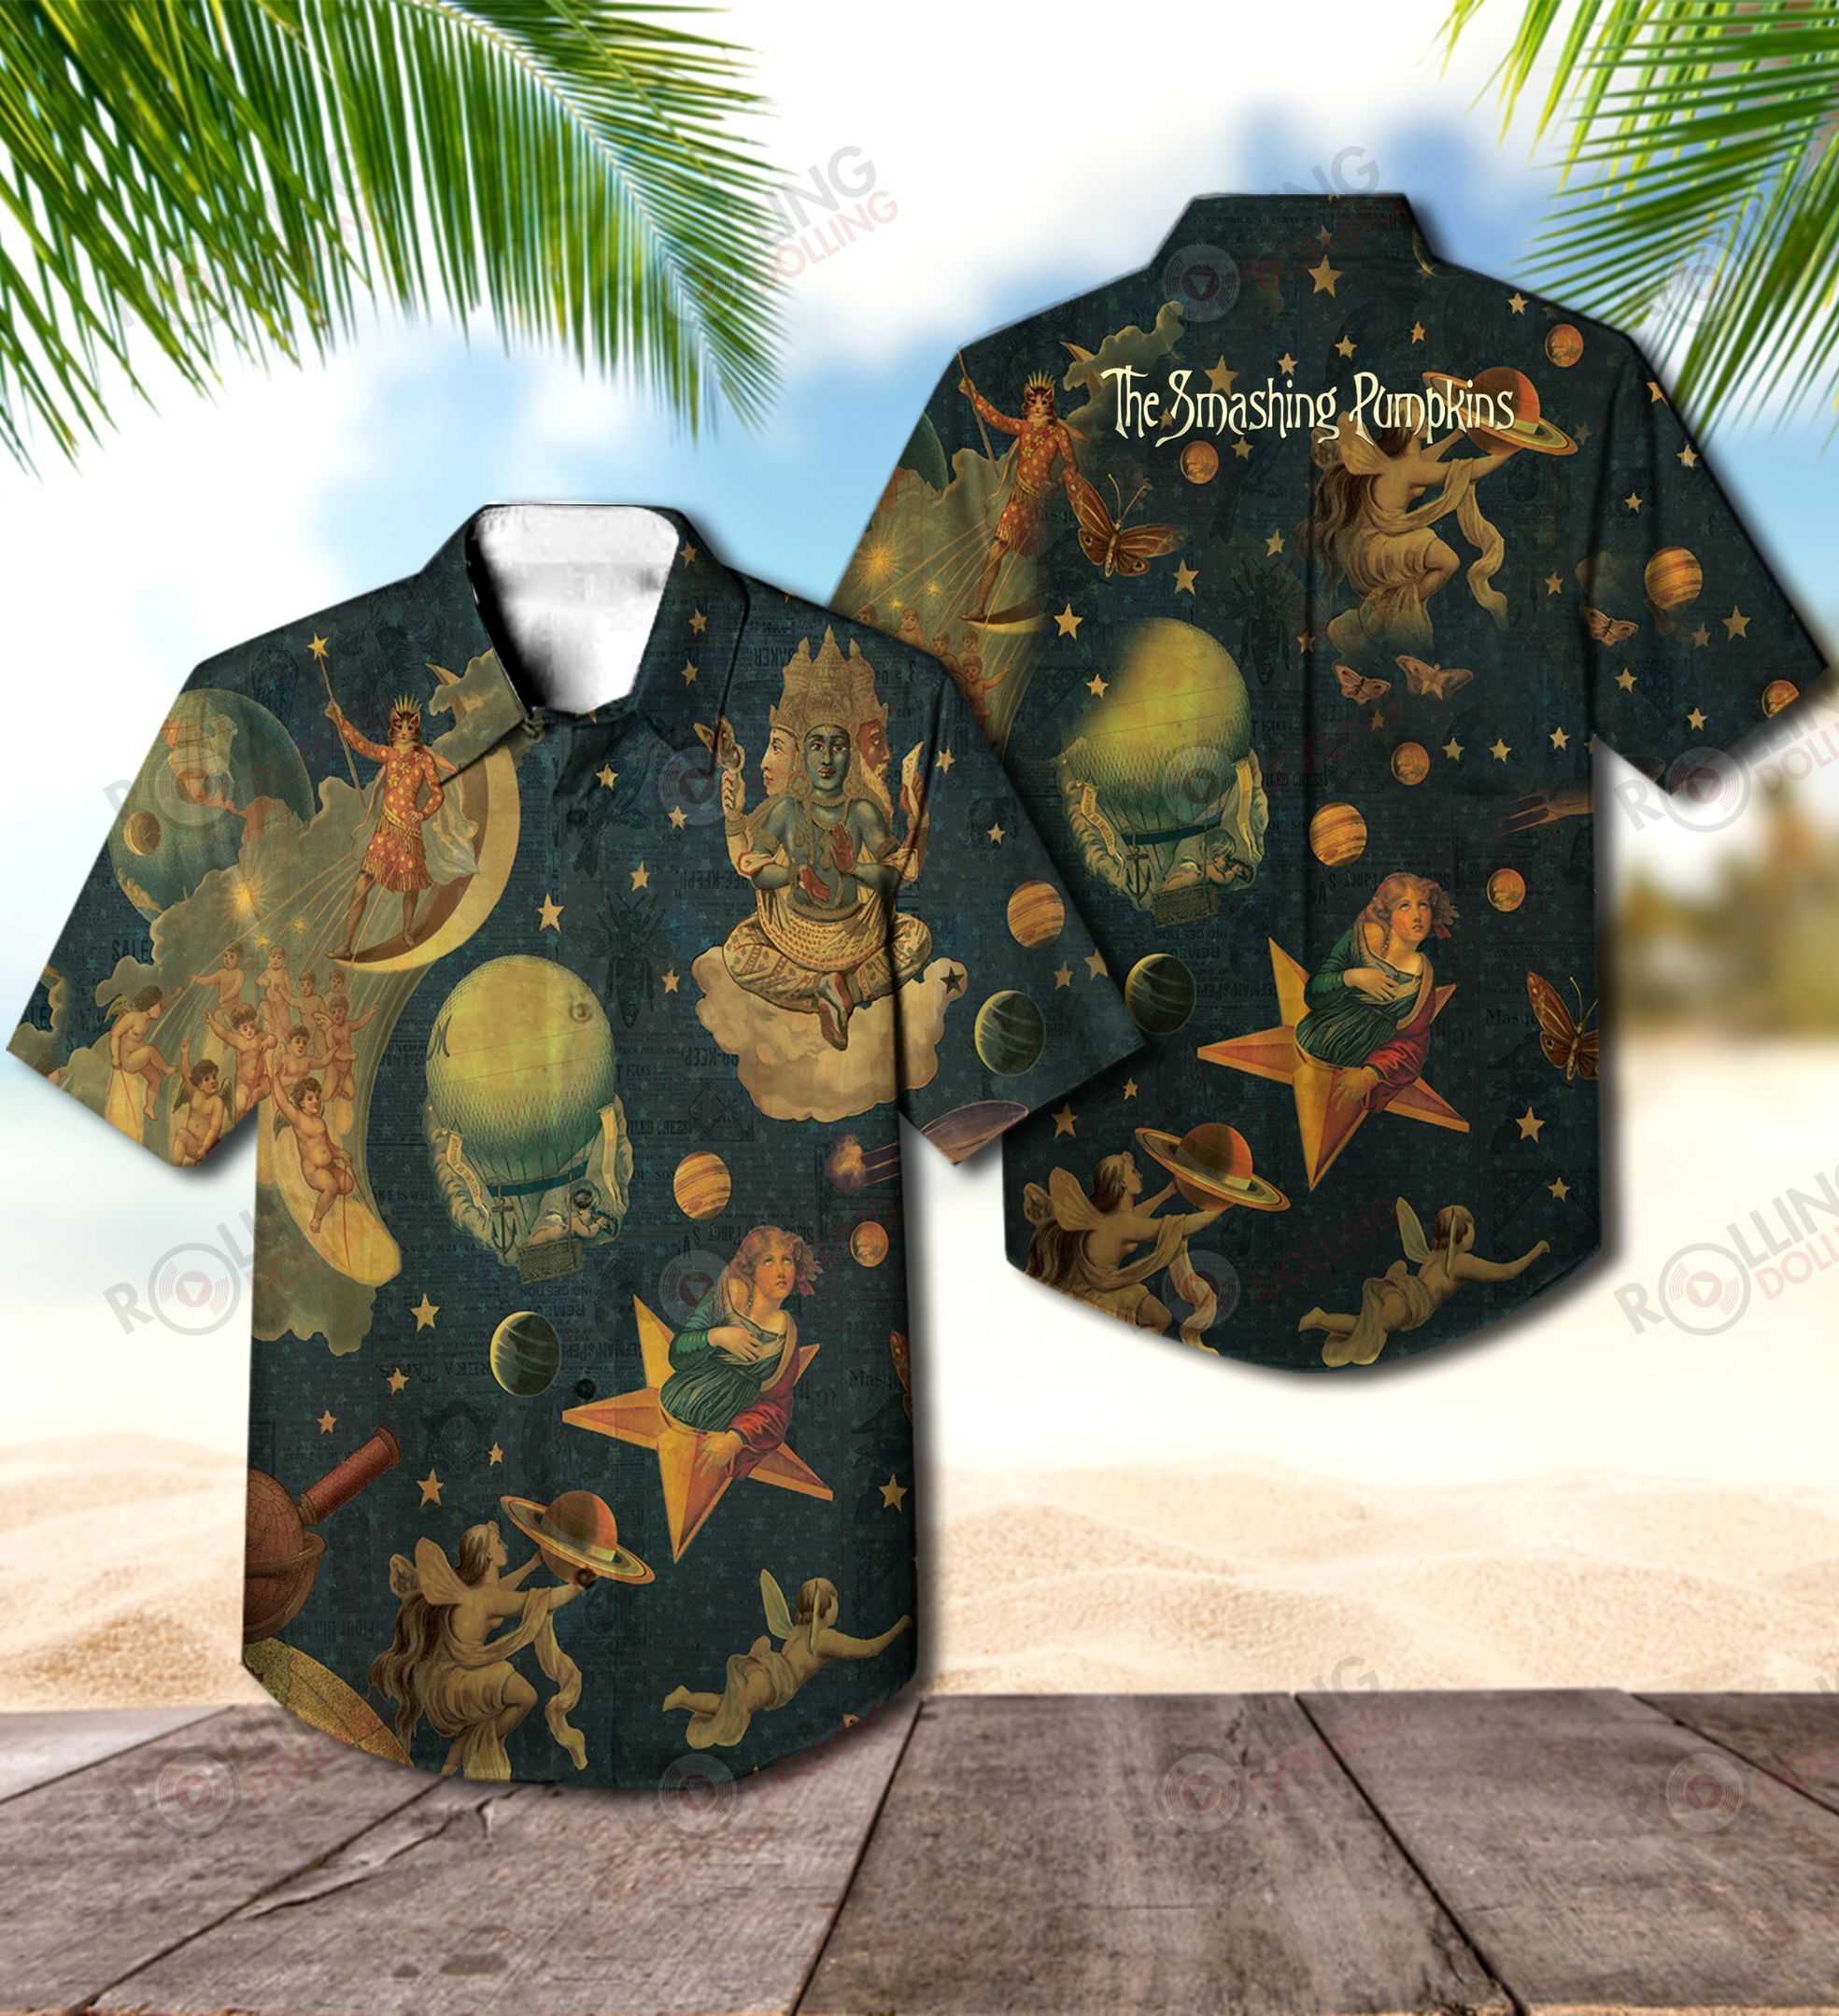 For summer, consider wearing This Amazing Hawaiian Shirt shirt in our store 98